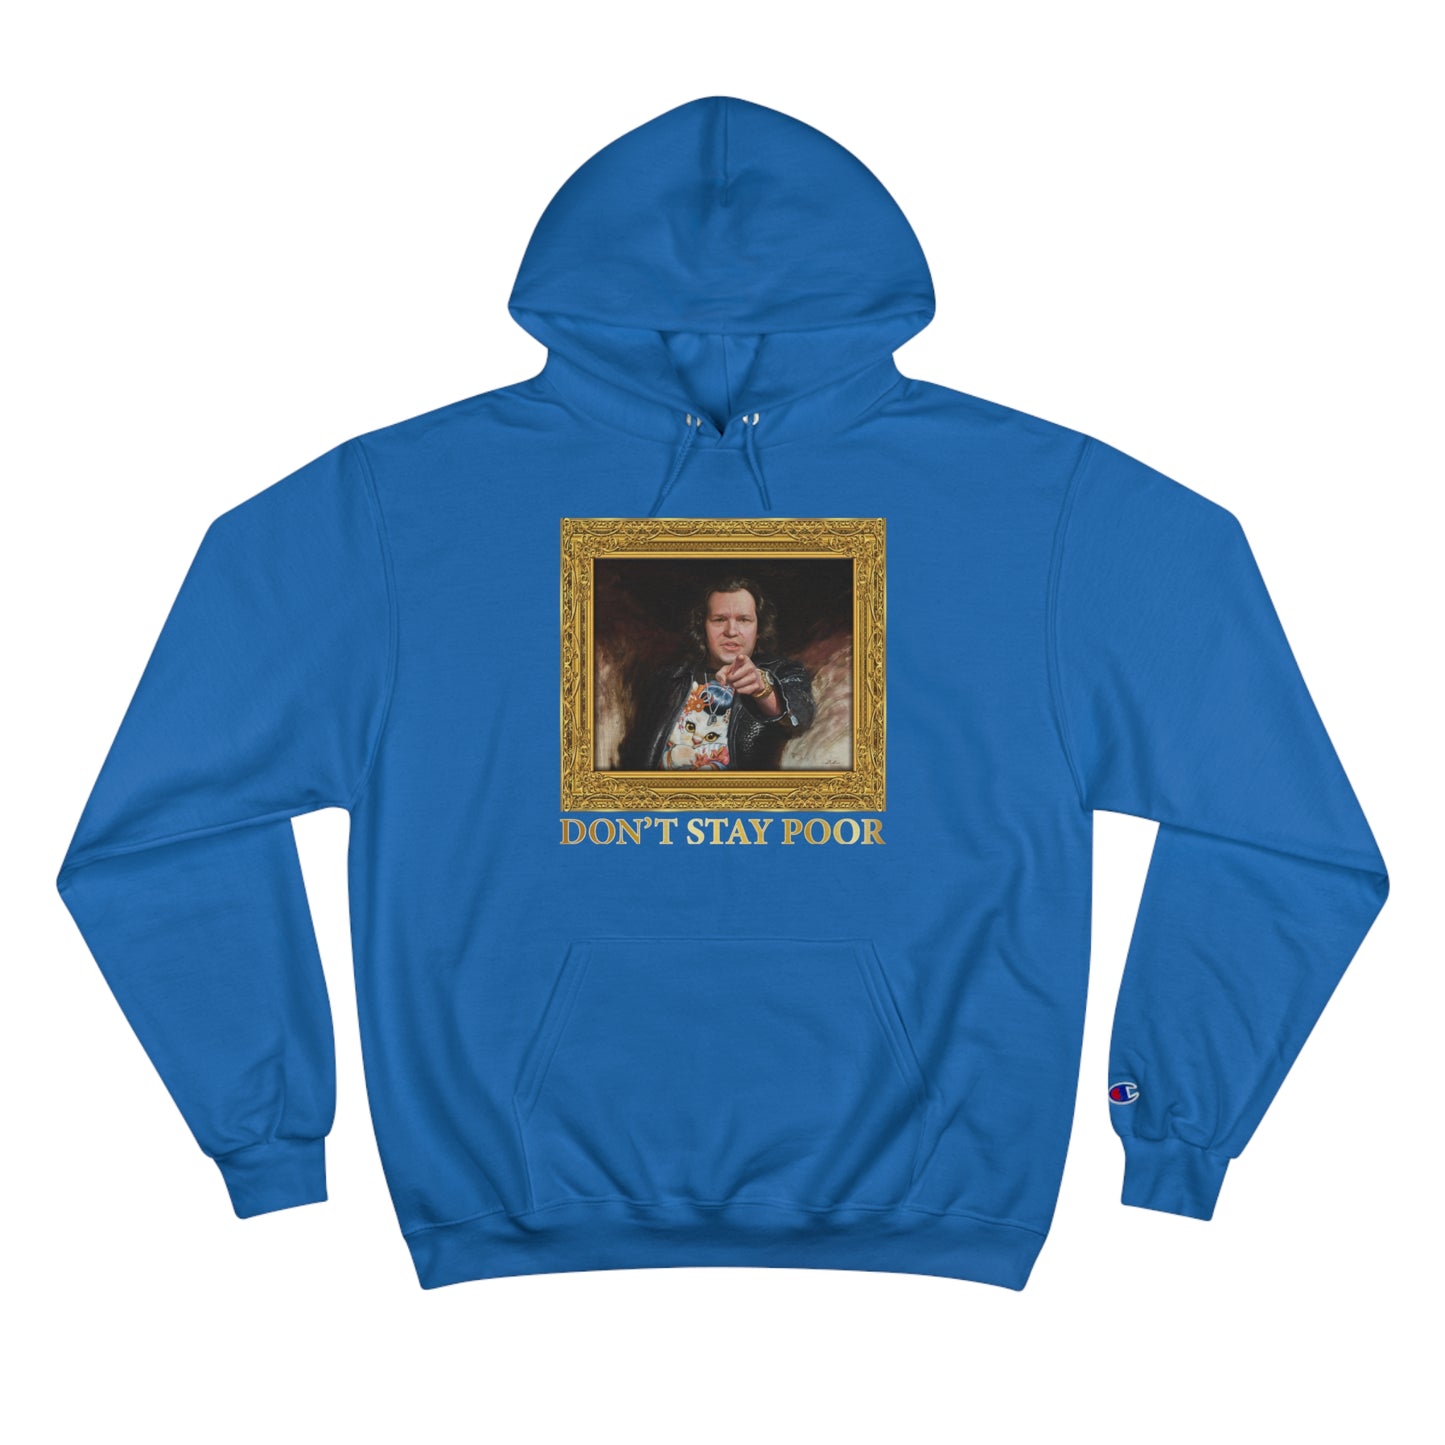 Champion Hoodie - Don't Stay Poor Painting